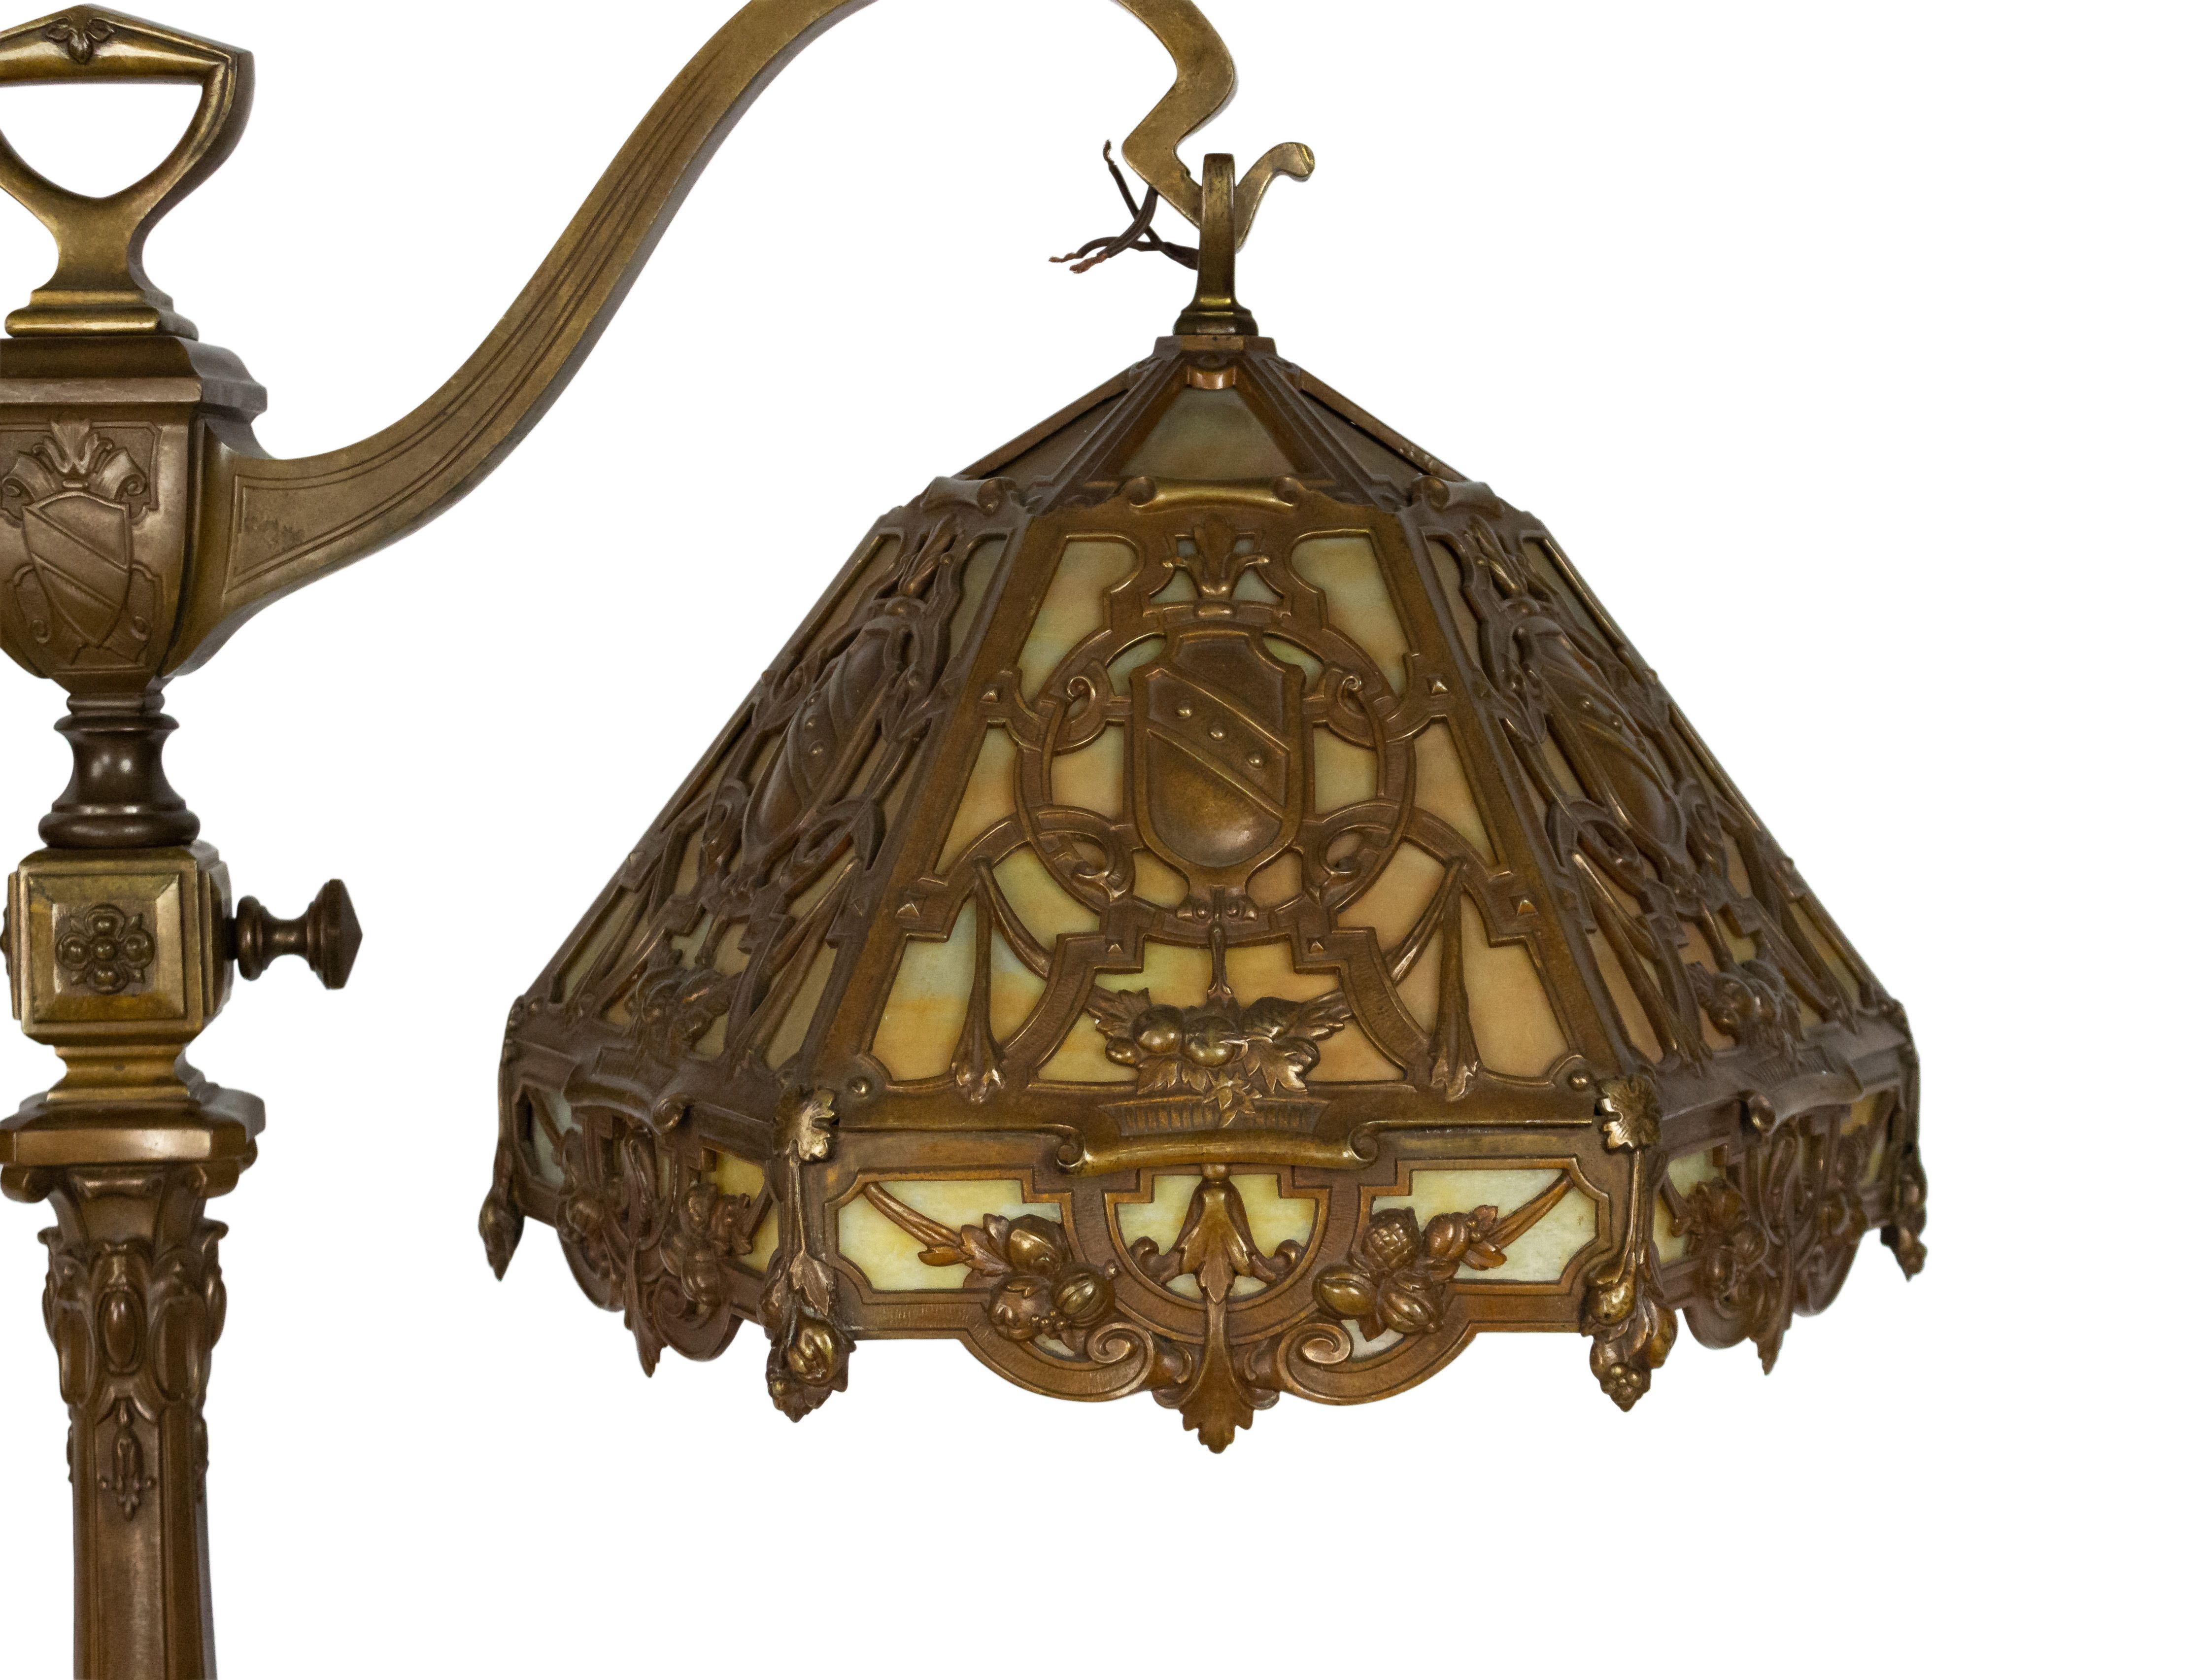 American Victorian monumental bronze double arm student lamp with 6 sided amber glass filigree shades (CALDWELL).
